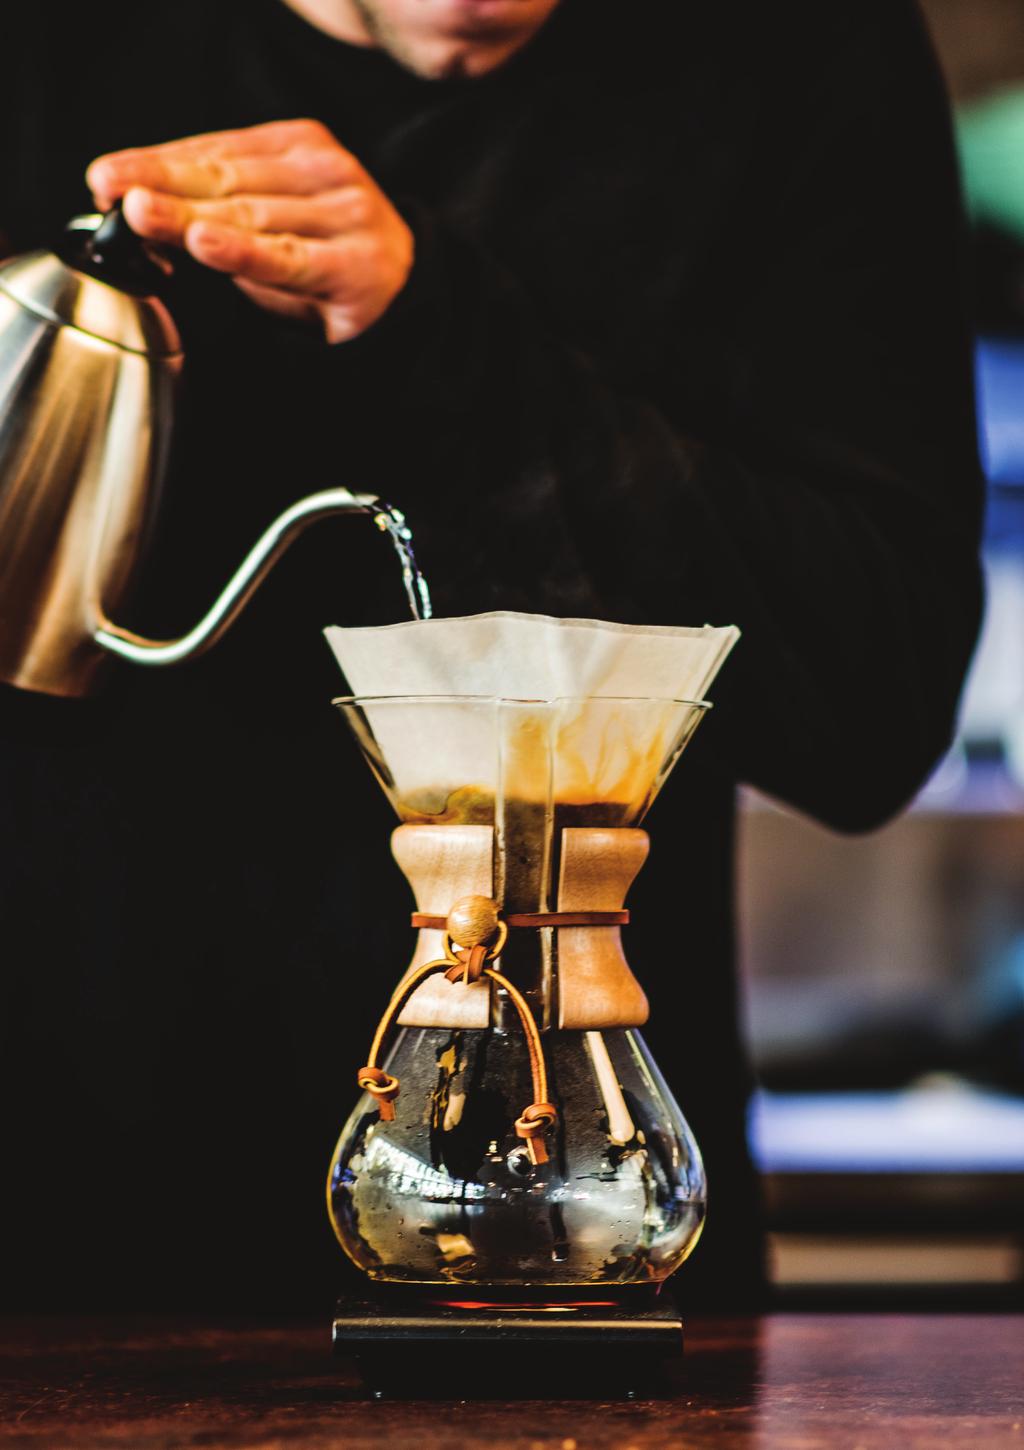 Have you tried alternative coffee brewing methods yet?